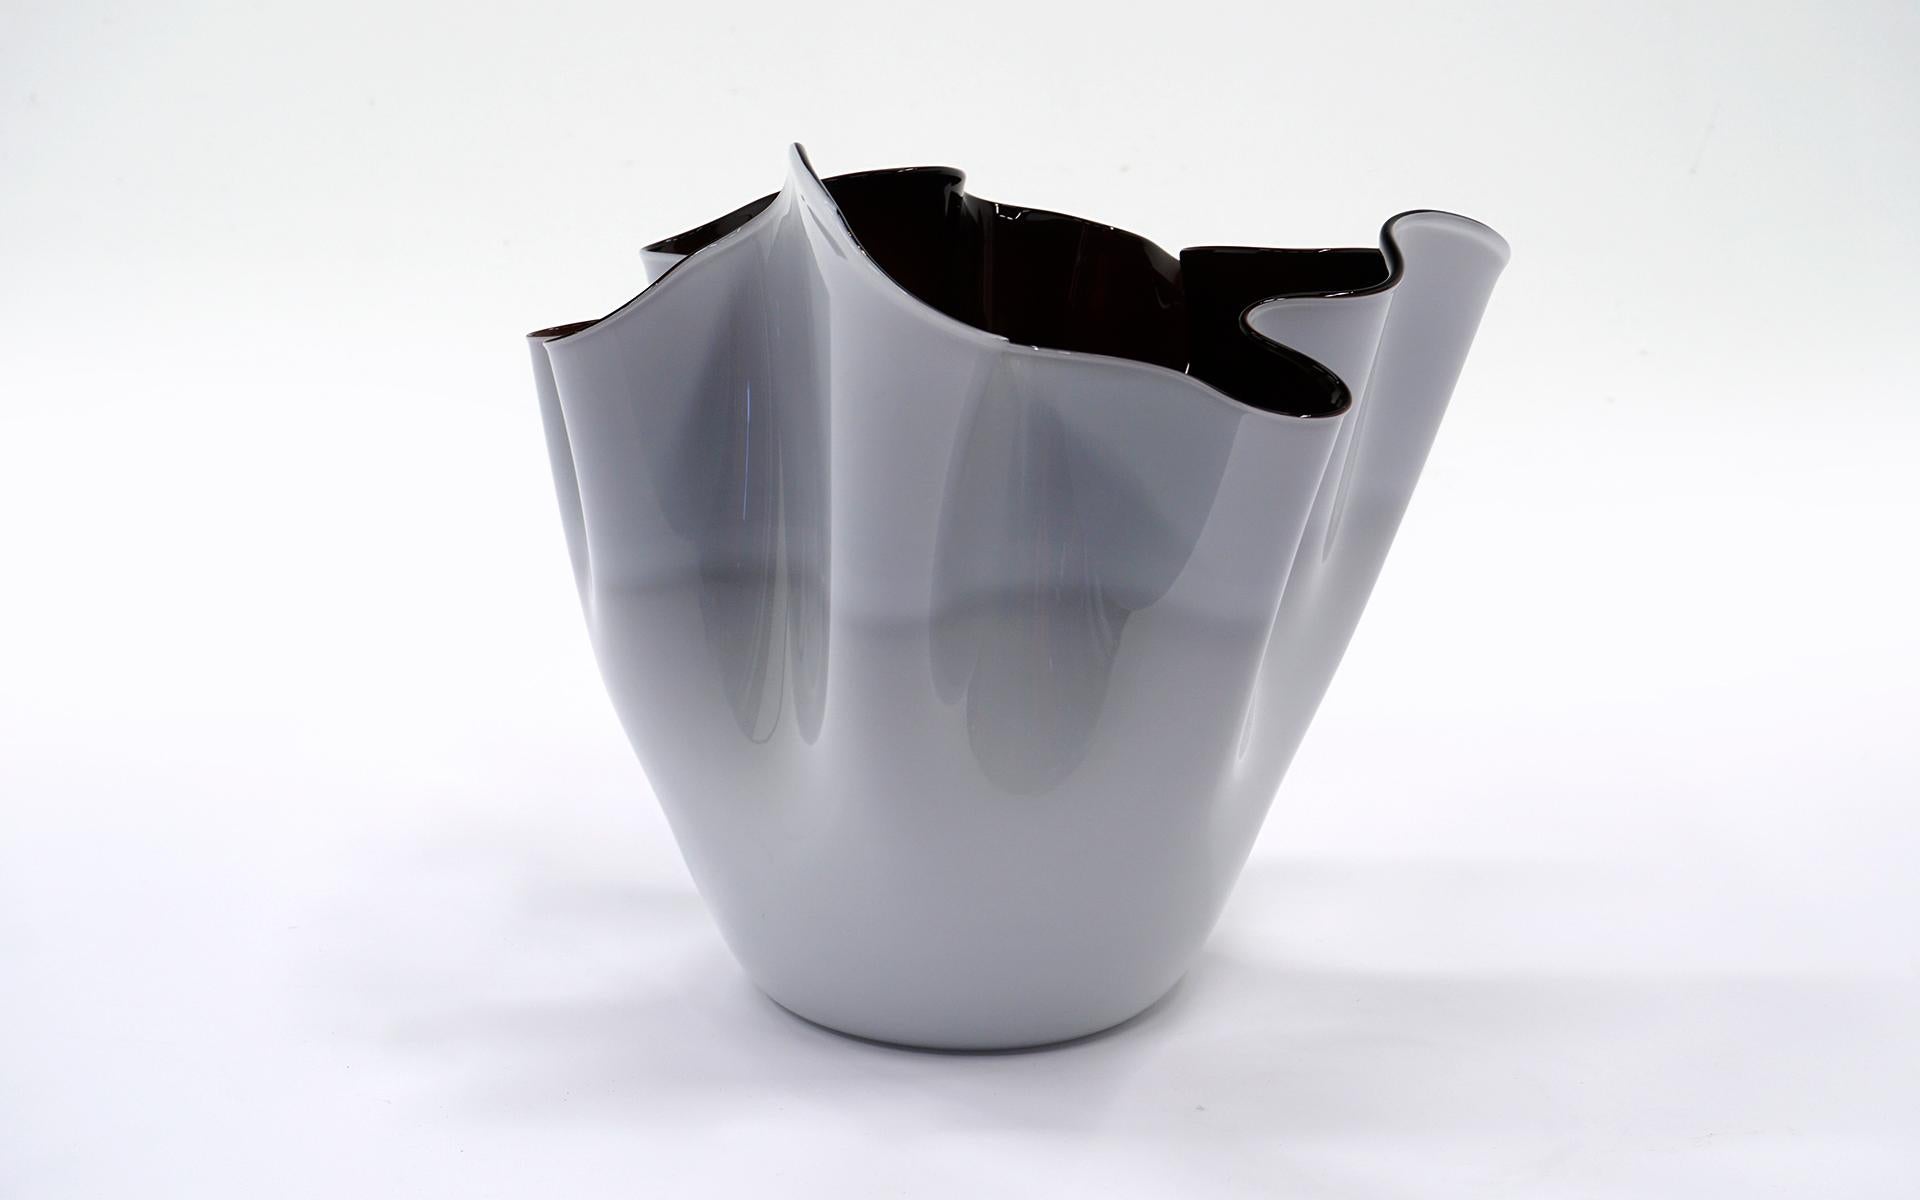 Beautiful, large Venini handkerchief vase or bowl designed by Fulvio Bianconi and Paolo Venini in 1948. It is an early production piece from the 1950s. The interior is very dark, almost black. The exterior is a rich white color. No chips, no